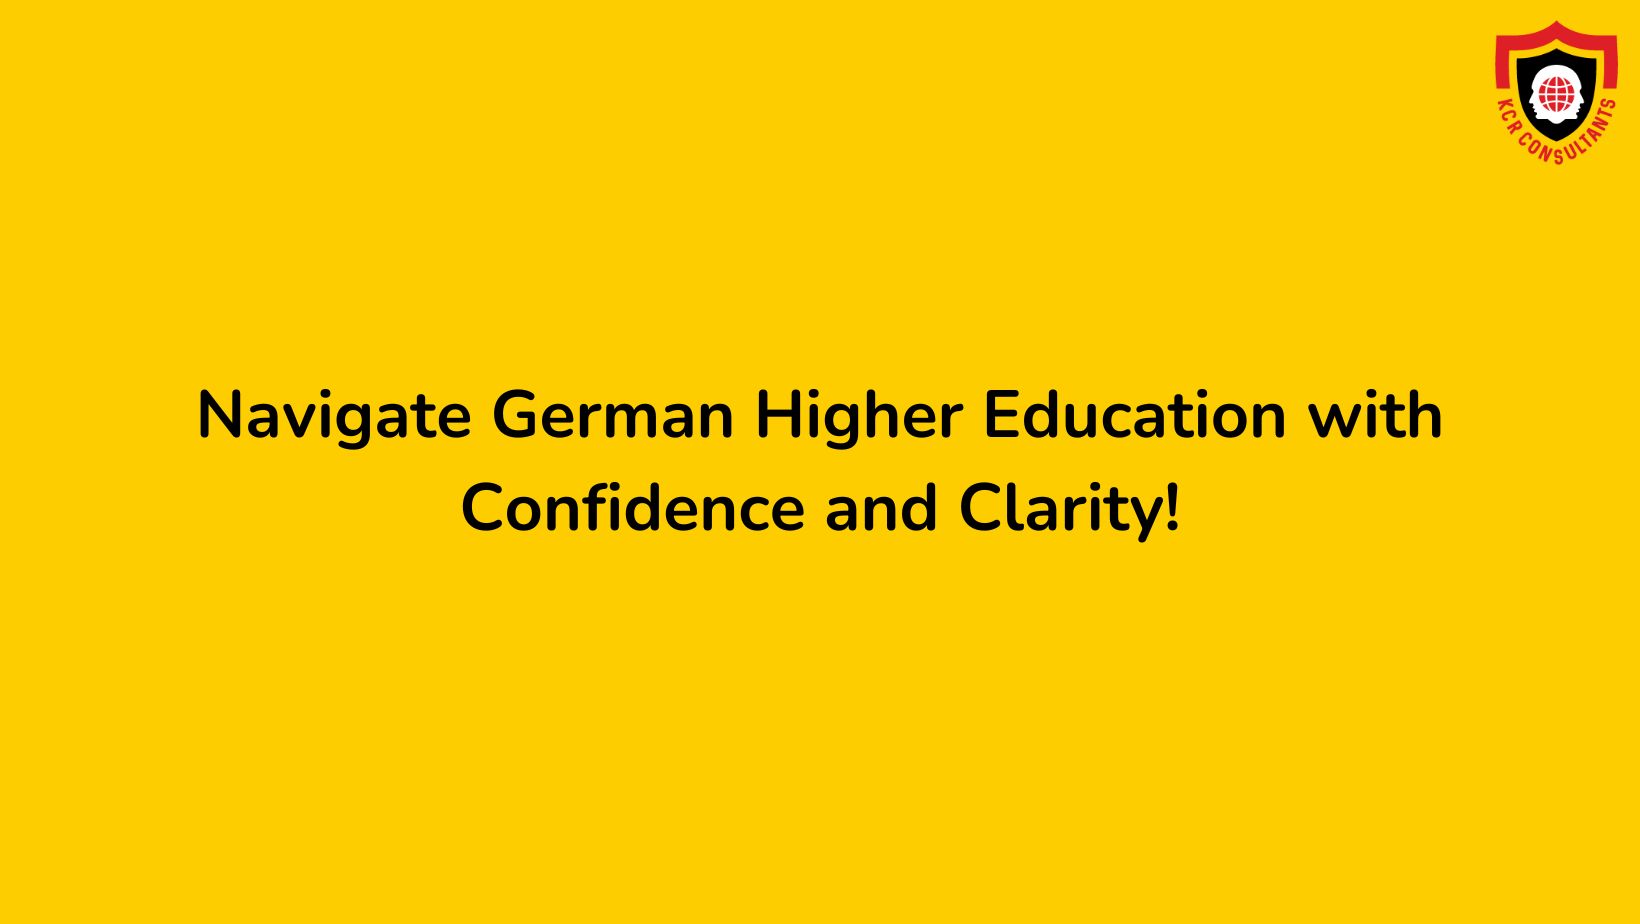 The best German education consultant - KCR CONSULTANTS